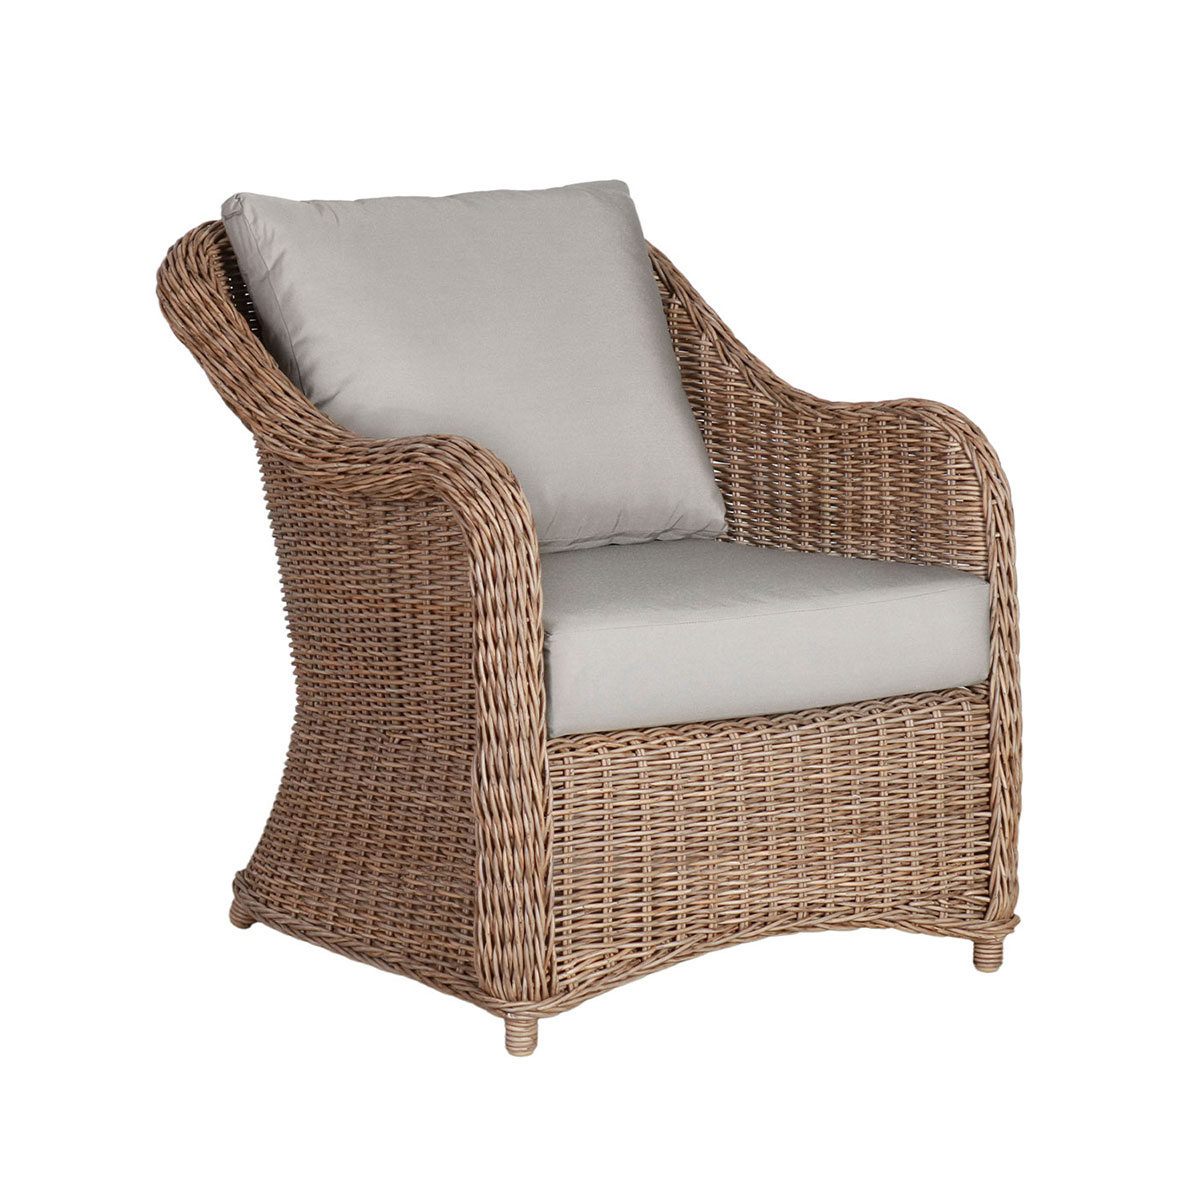 Block & Chisel outdoor lounge chair